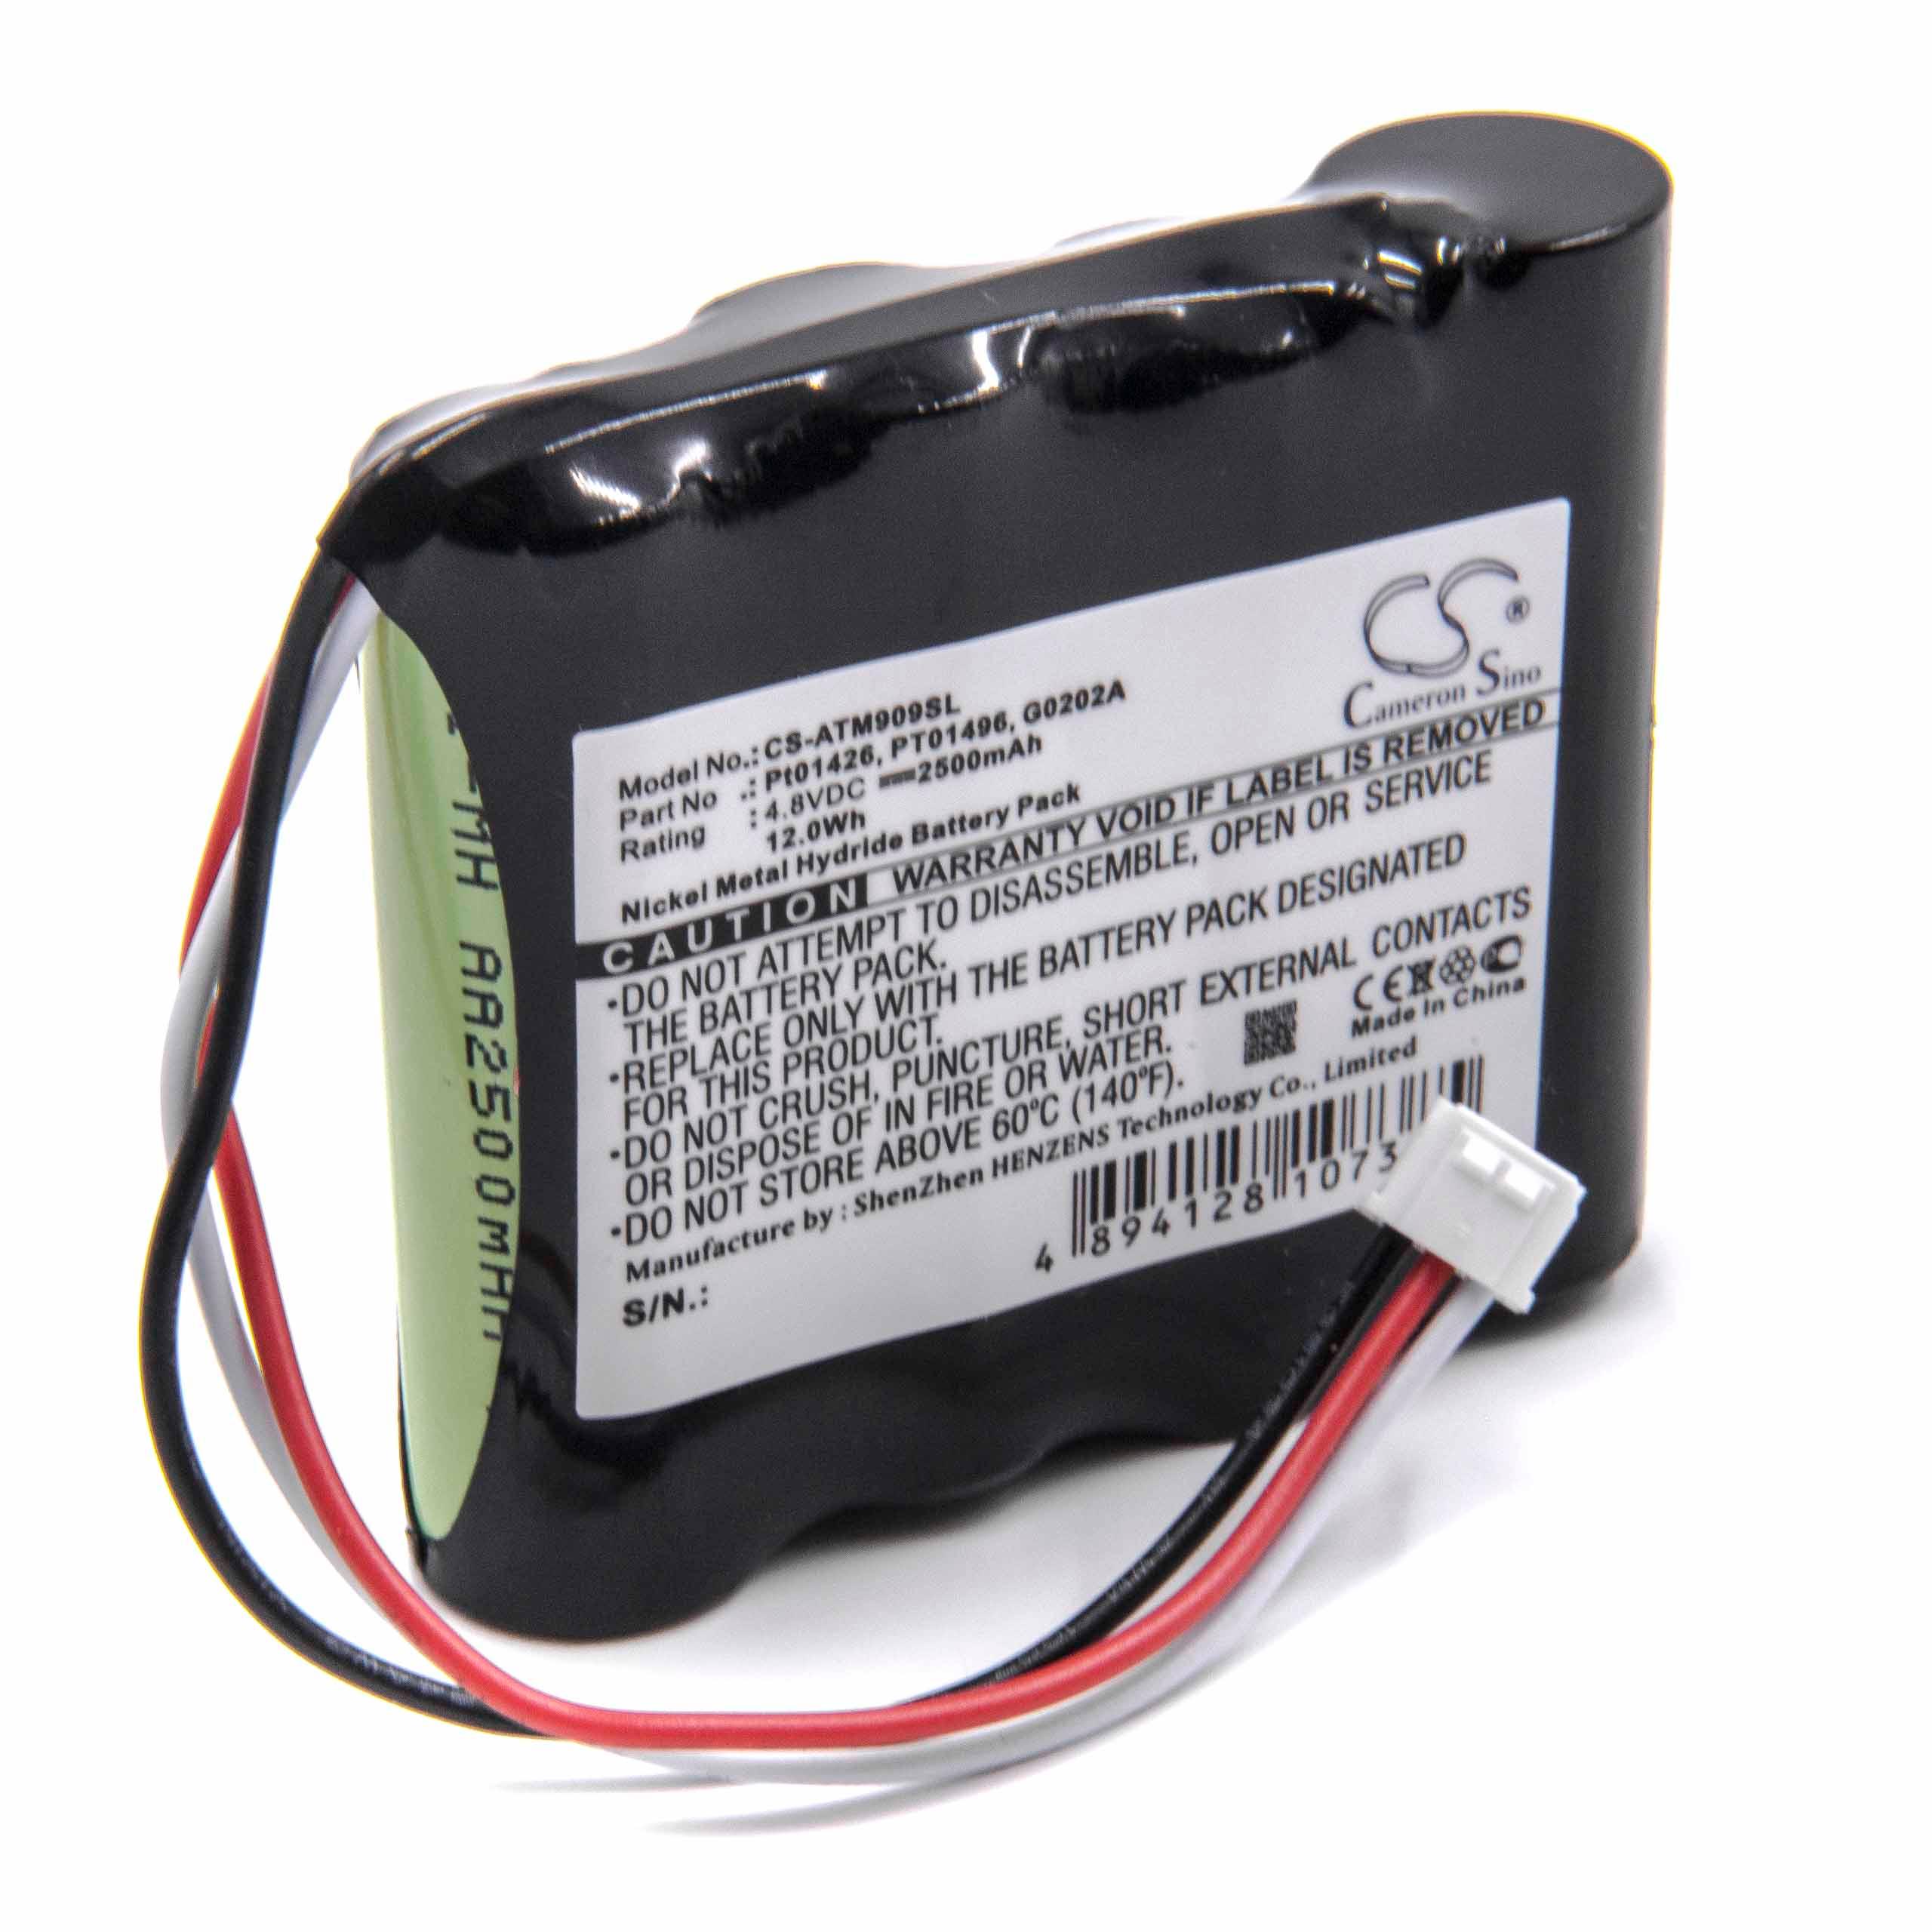 Laser Battery Replacement for Anritsu G0202A, PT01426, PT01496 - 2500mAh 4.8V NiMH